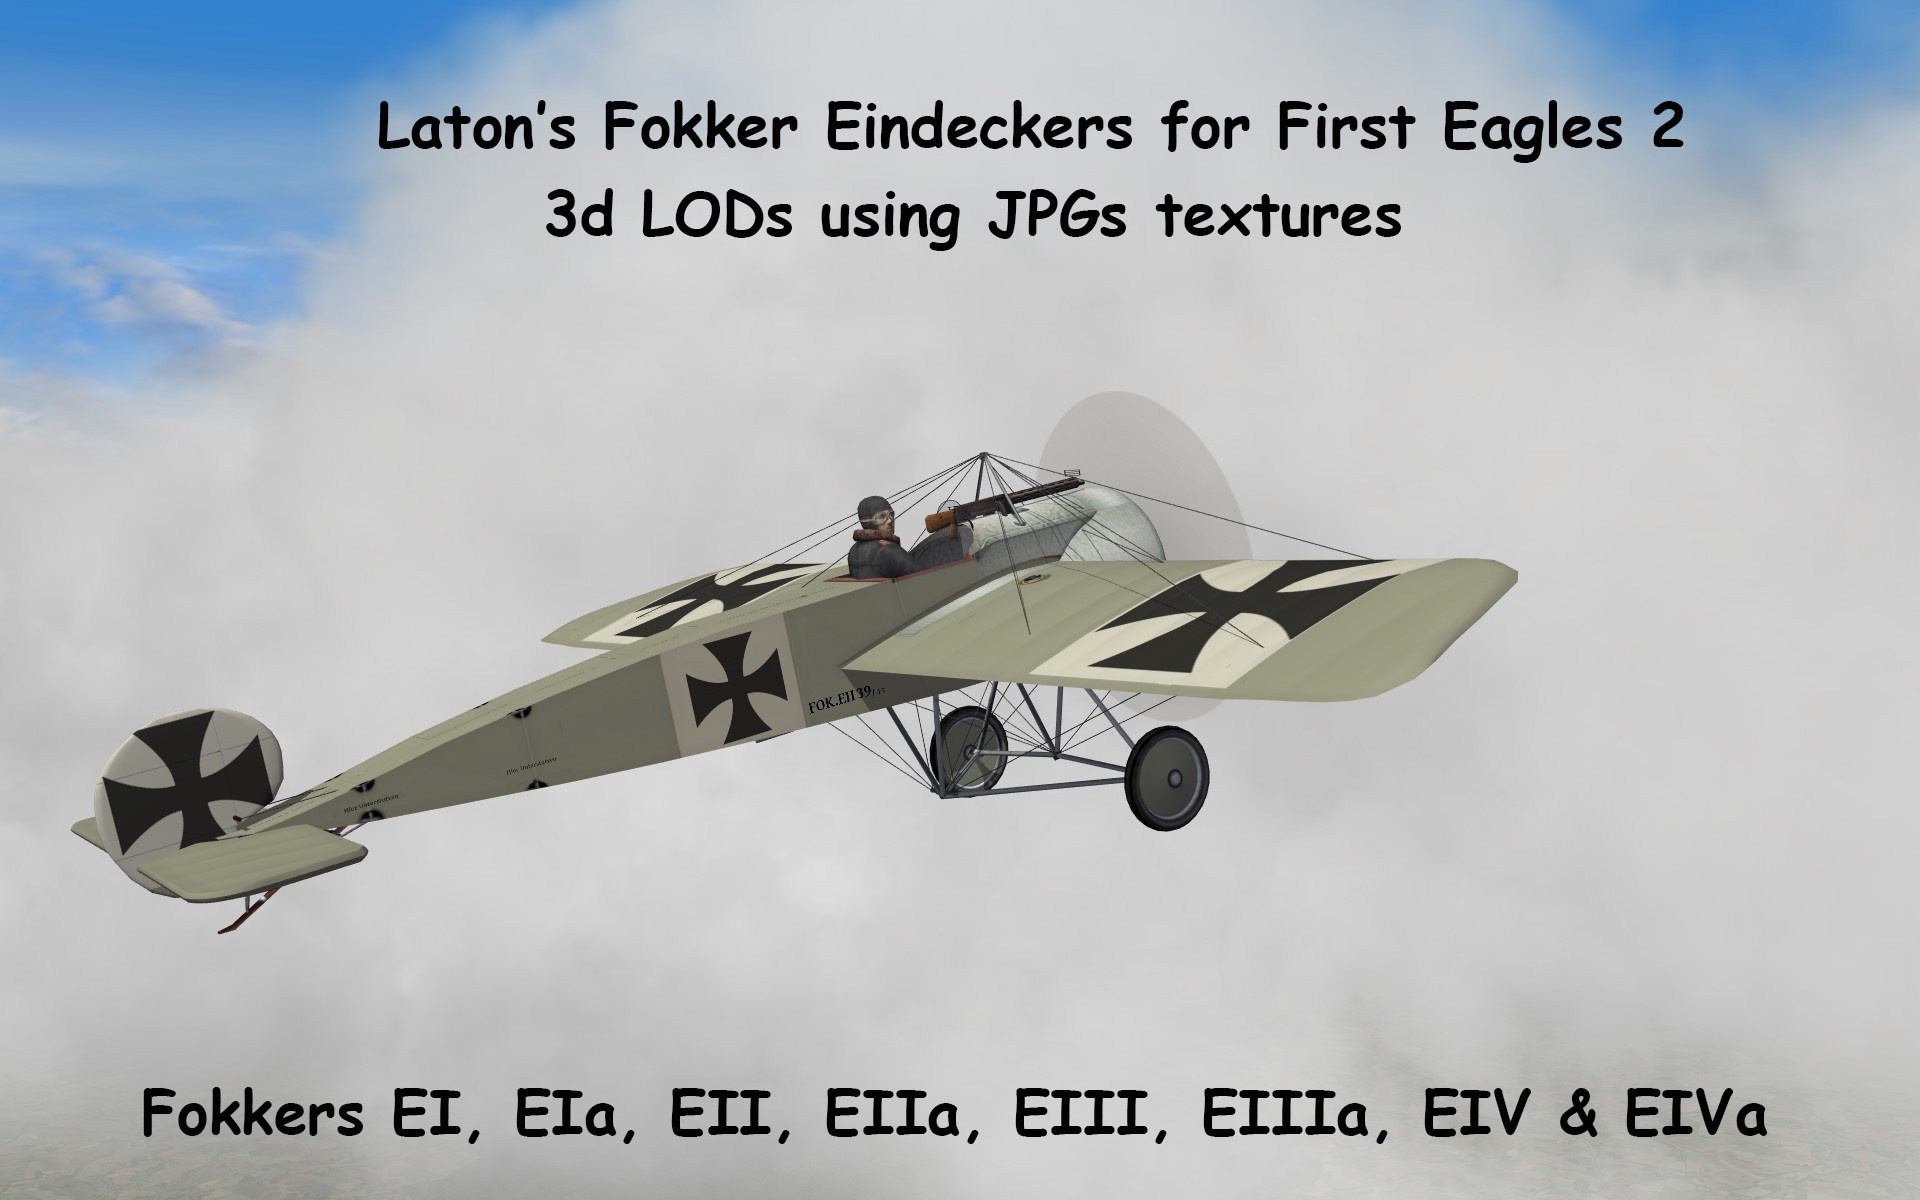 Laton Fokker Eindeckers for First Eagles 2